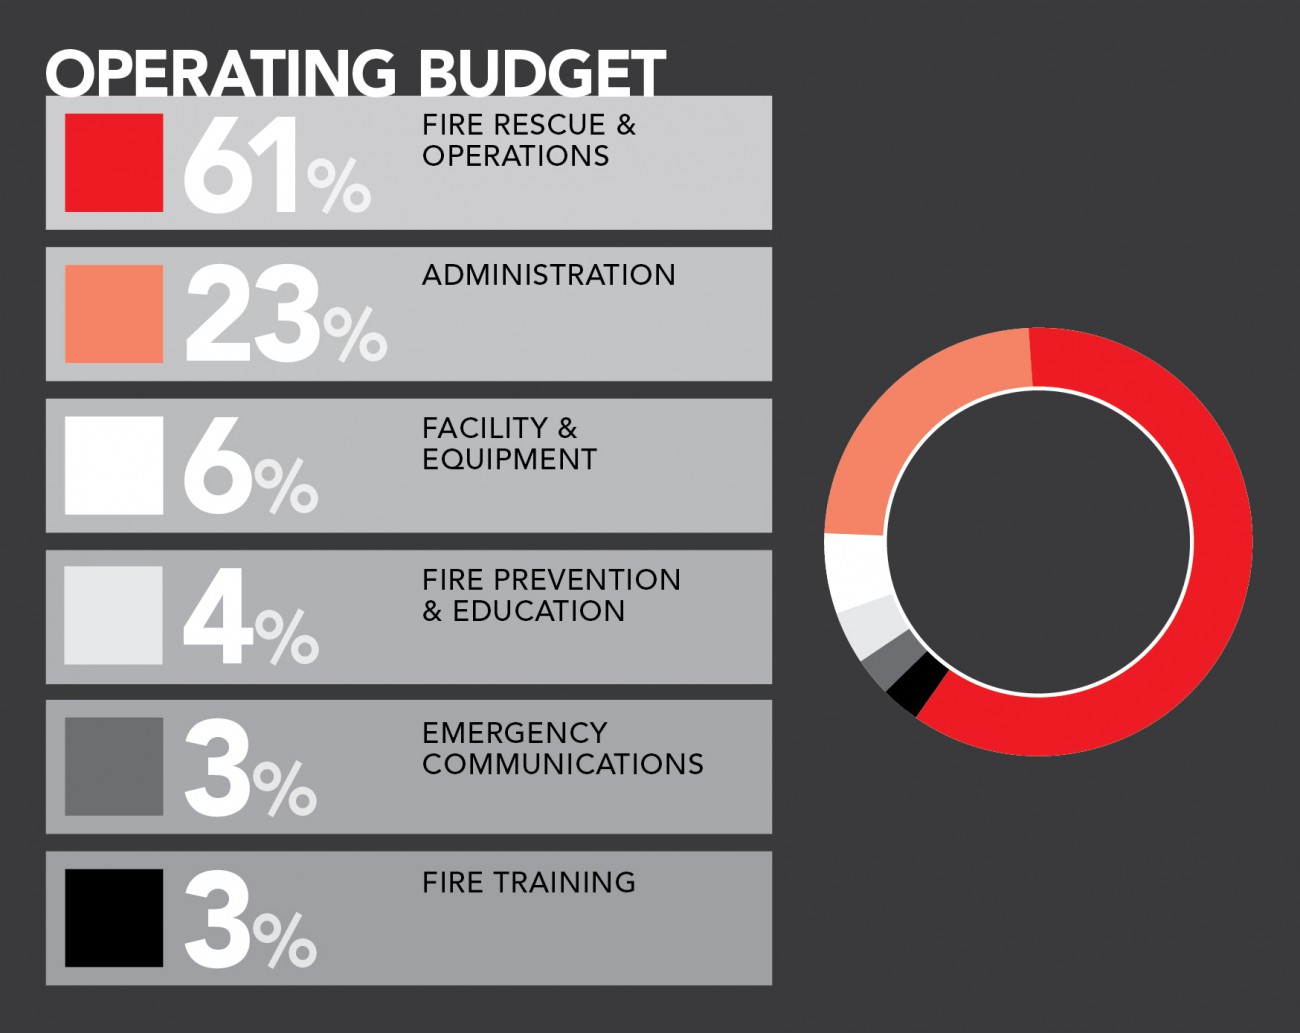 Graphic: 2020 operating budget: fire and rescue operations, 61%; administration, 23%; facility and equipment, 6%; public safety and education, 4%; emergency communications, 3%; fire training 3%.